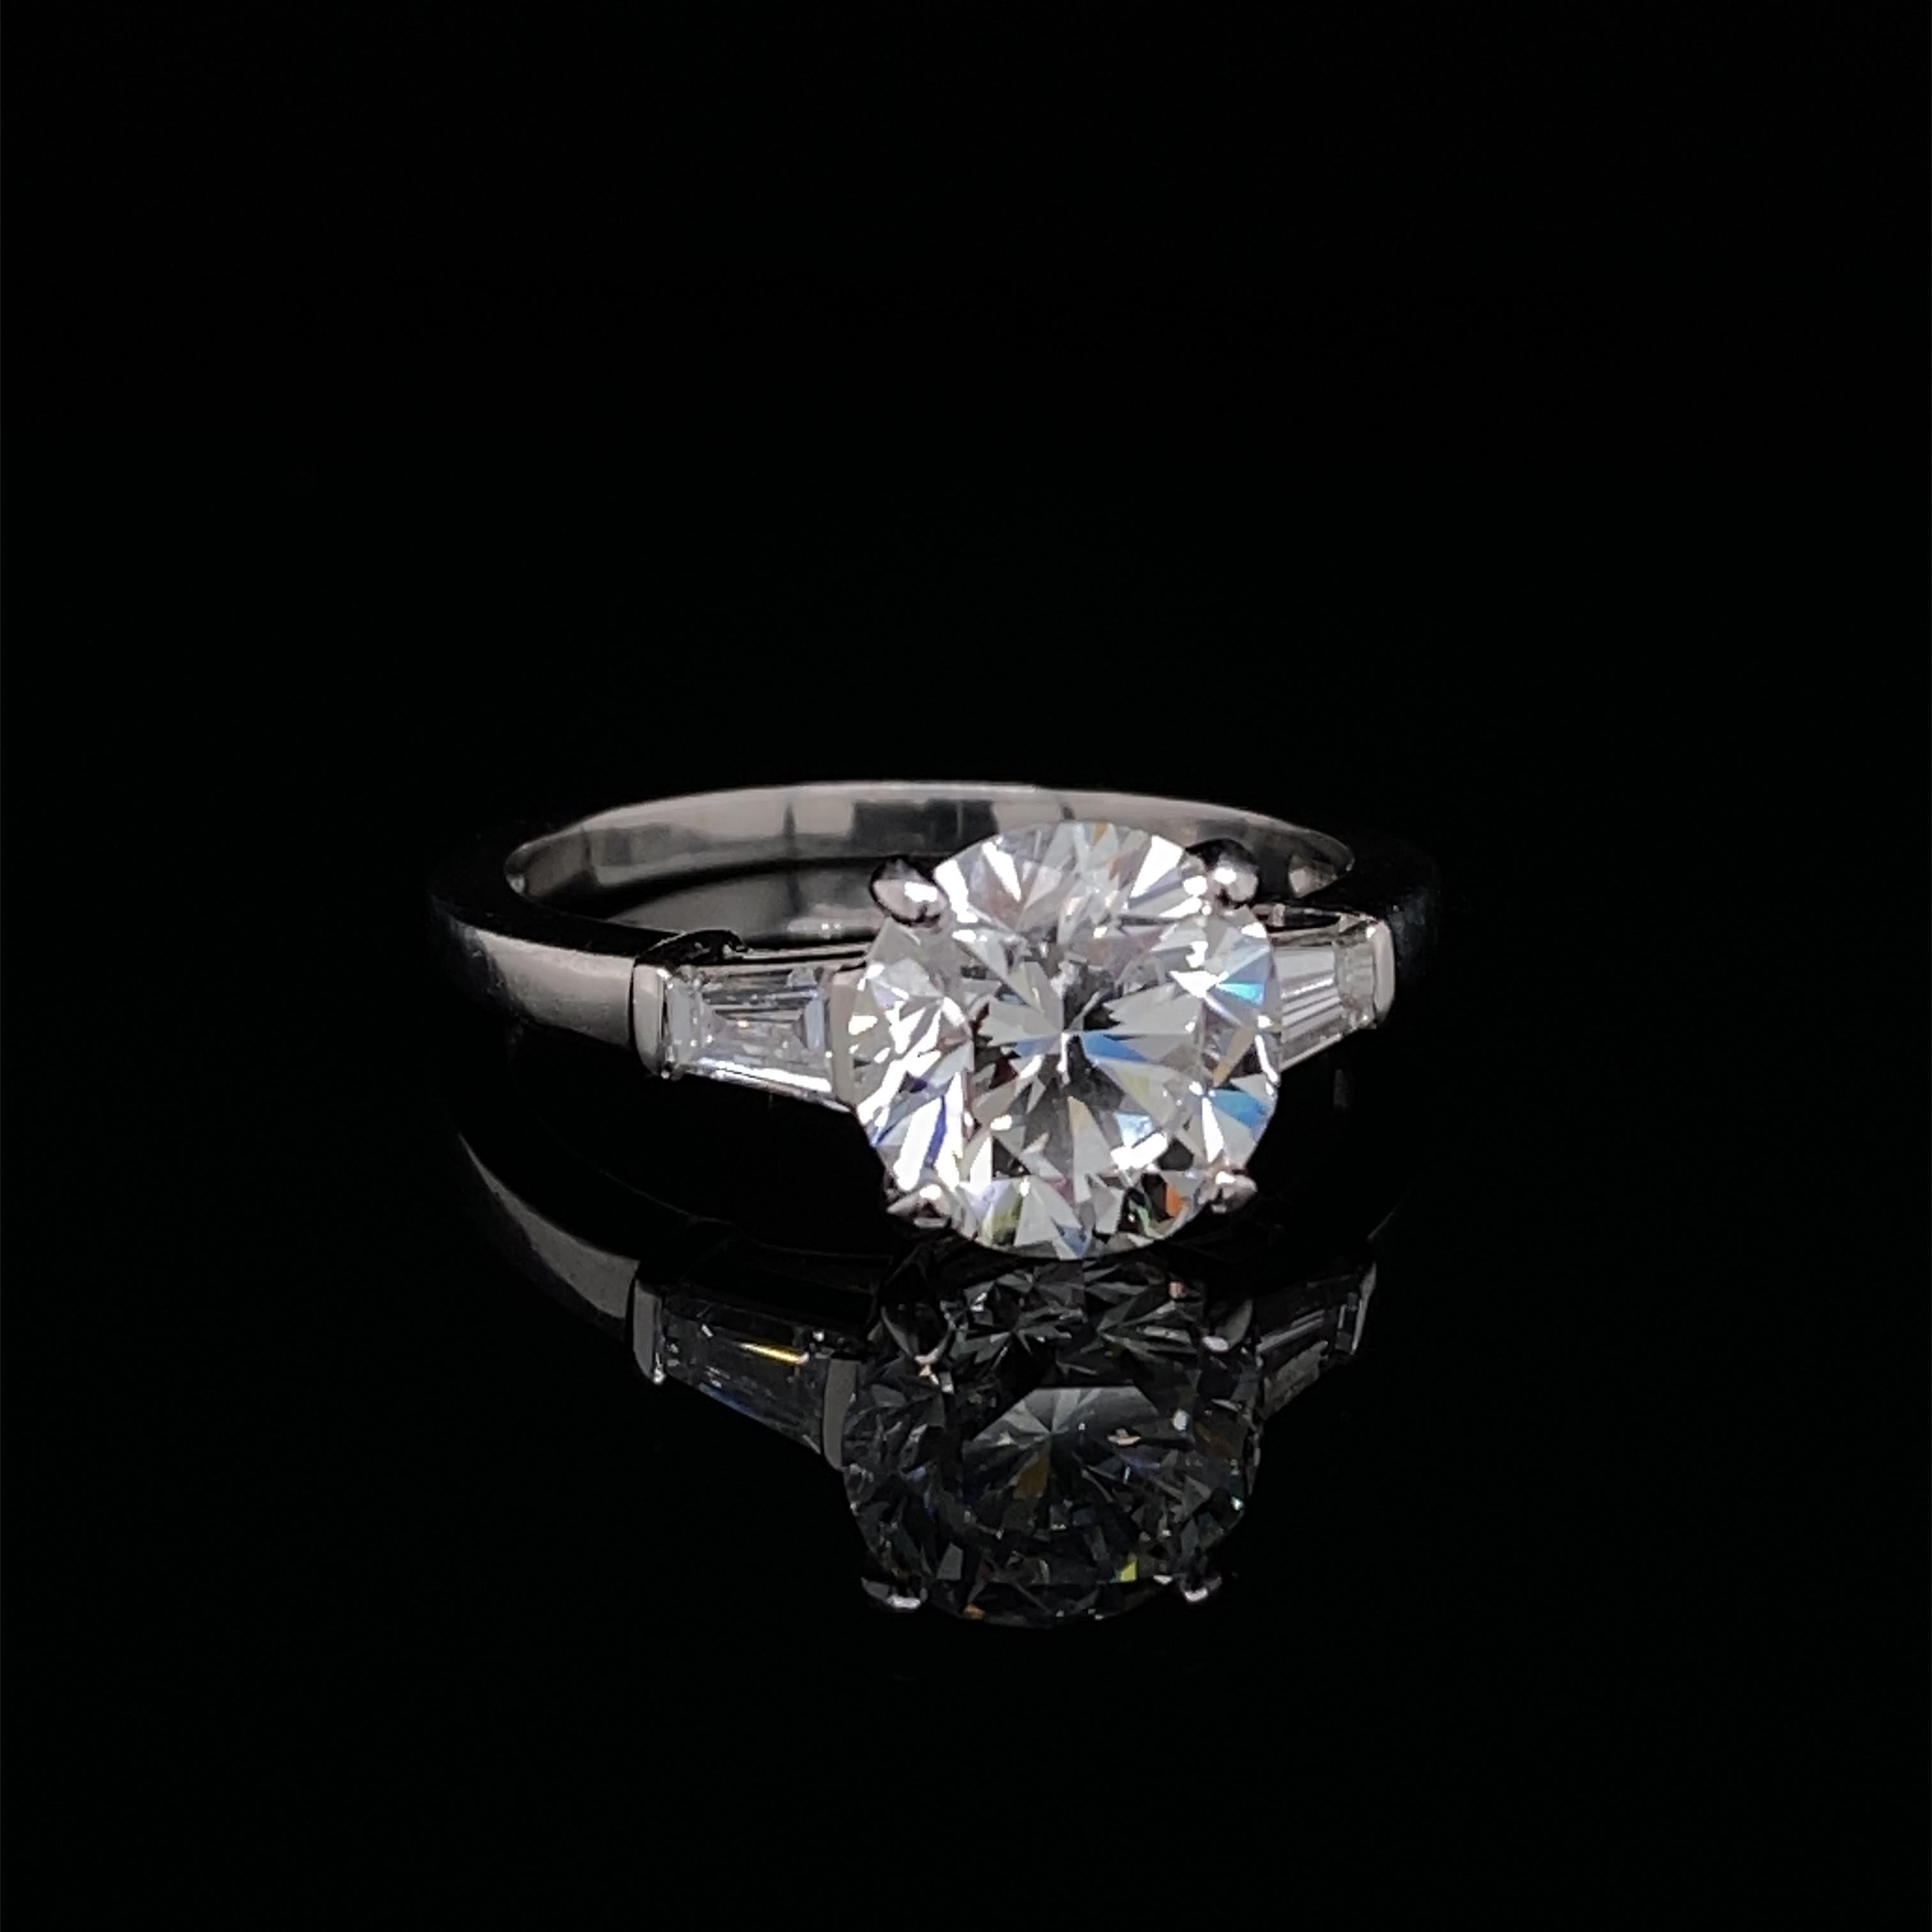 A Bvlgari diamond engagement ring in platinum of 2.02 carat.

An exceptional Art Deco inspired diamond solitaire engagement ring set in platinum by the Italian Jewellery House Bvlgari.

The ring is set to its centre with a 2.02 carat round brilliant